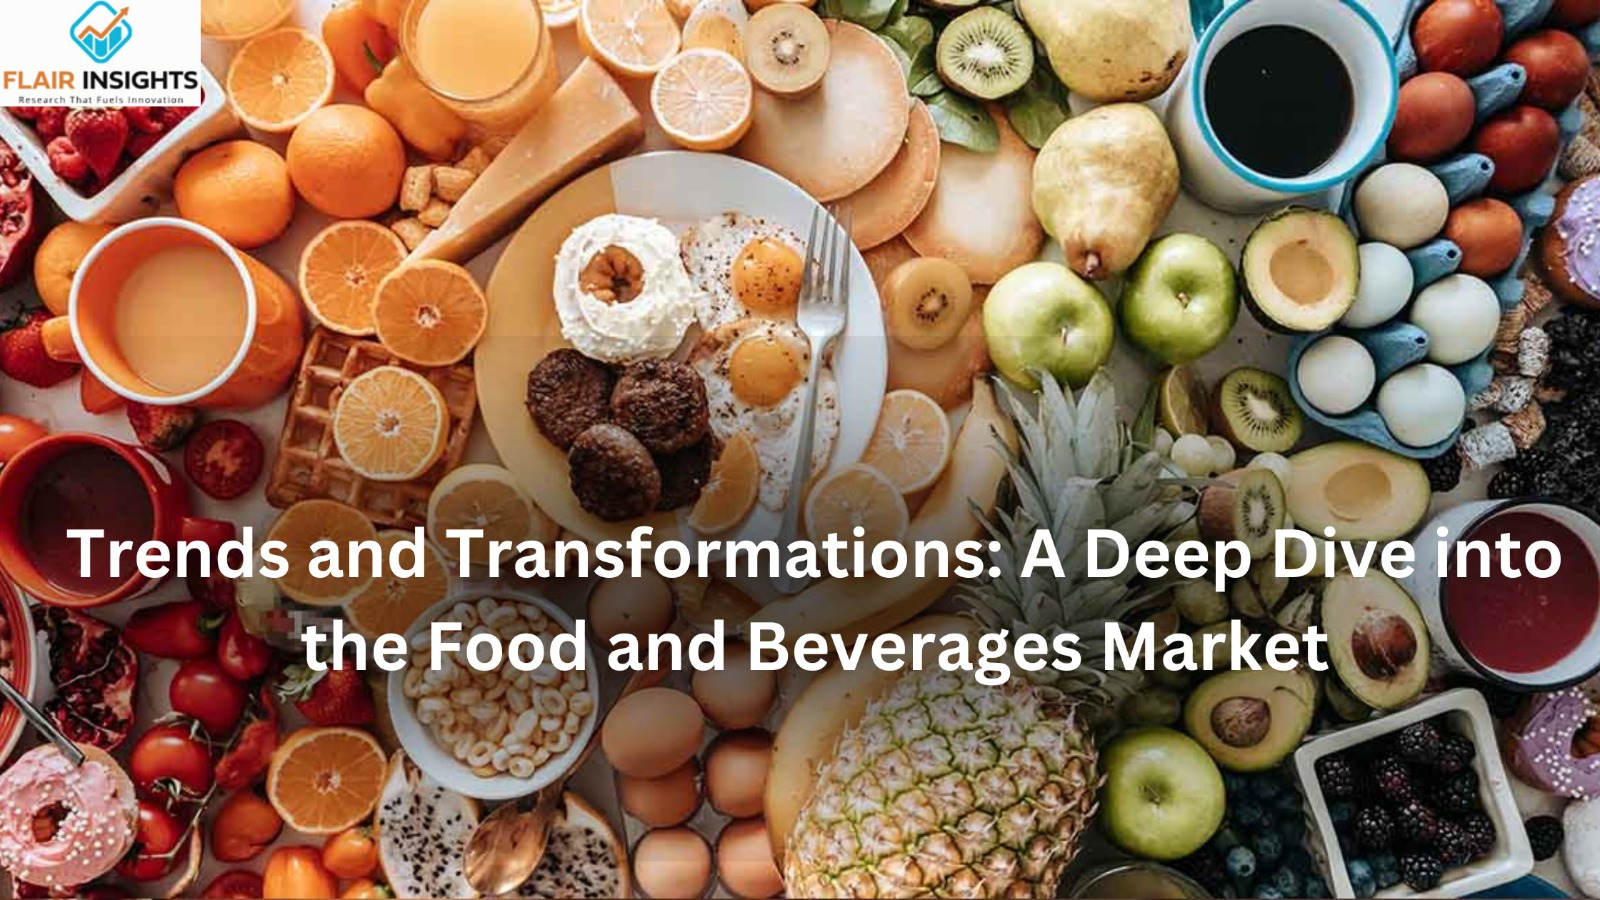 Trends and Transformations: A Deep Dive into the Food and Beverages Market